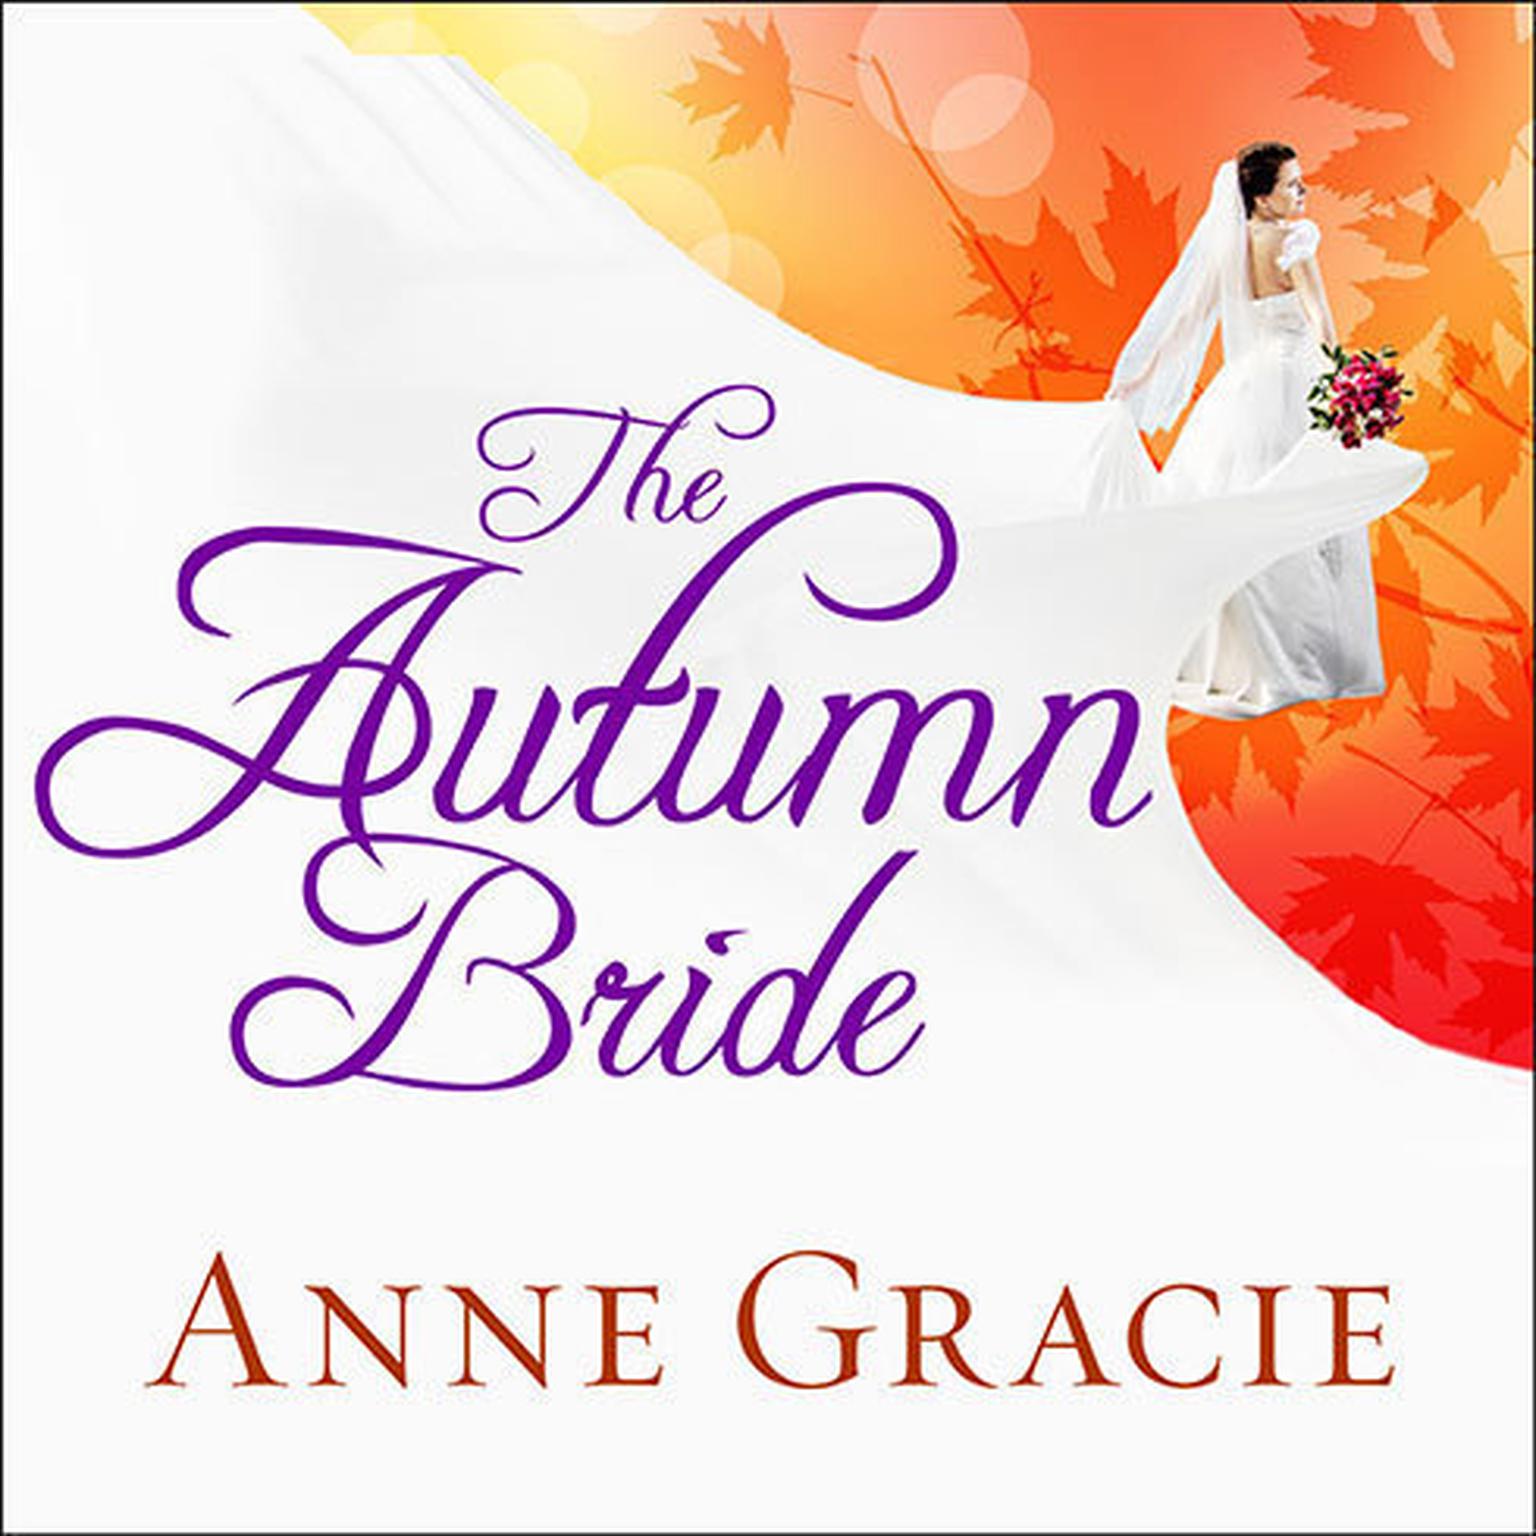 The Autumn Bride Audiobook, by Anne Gracie